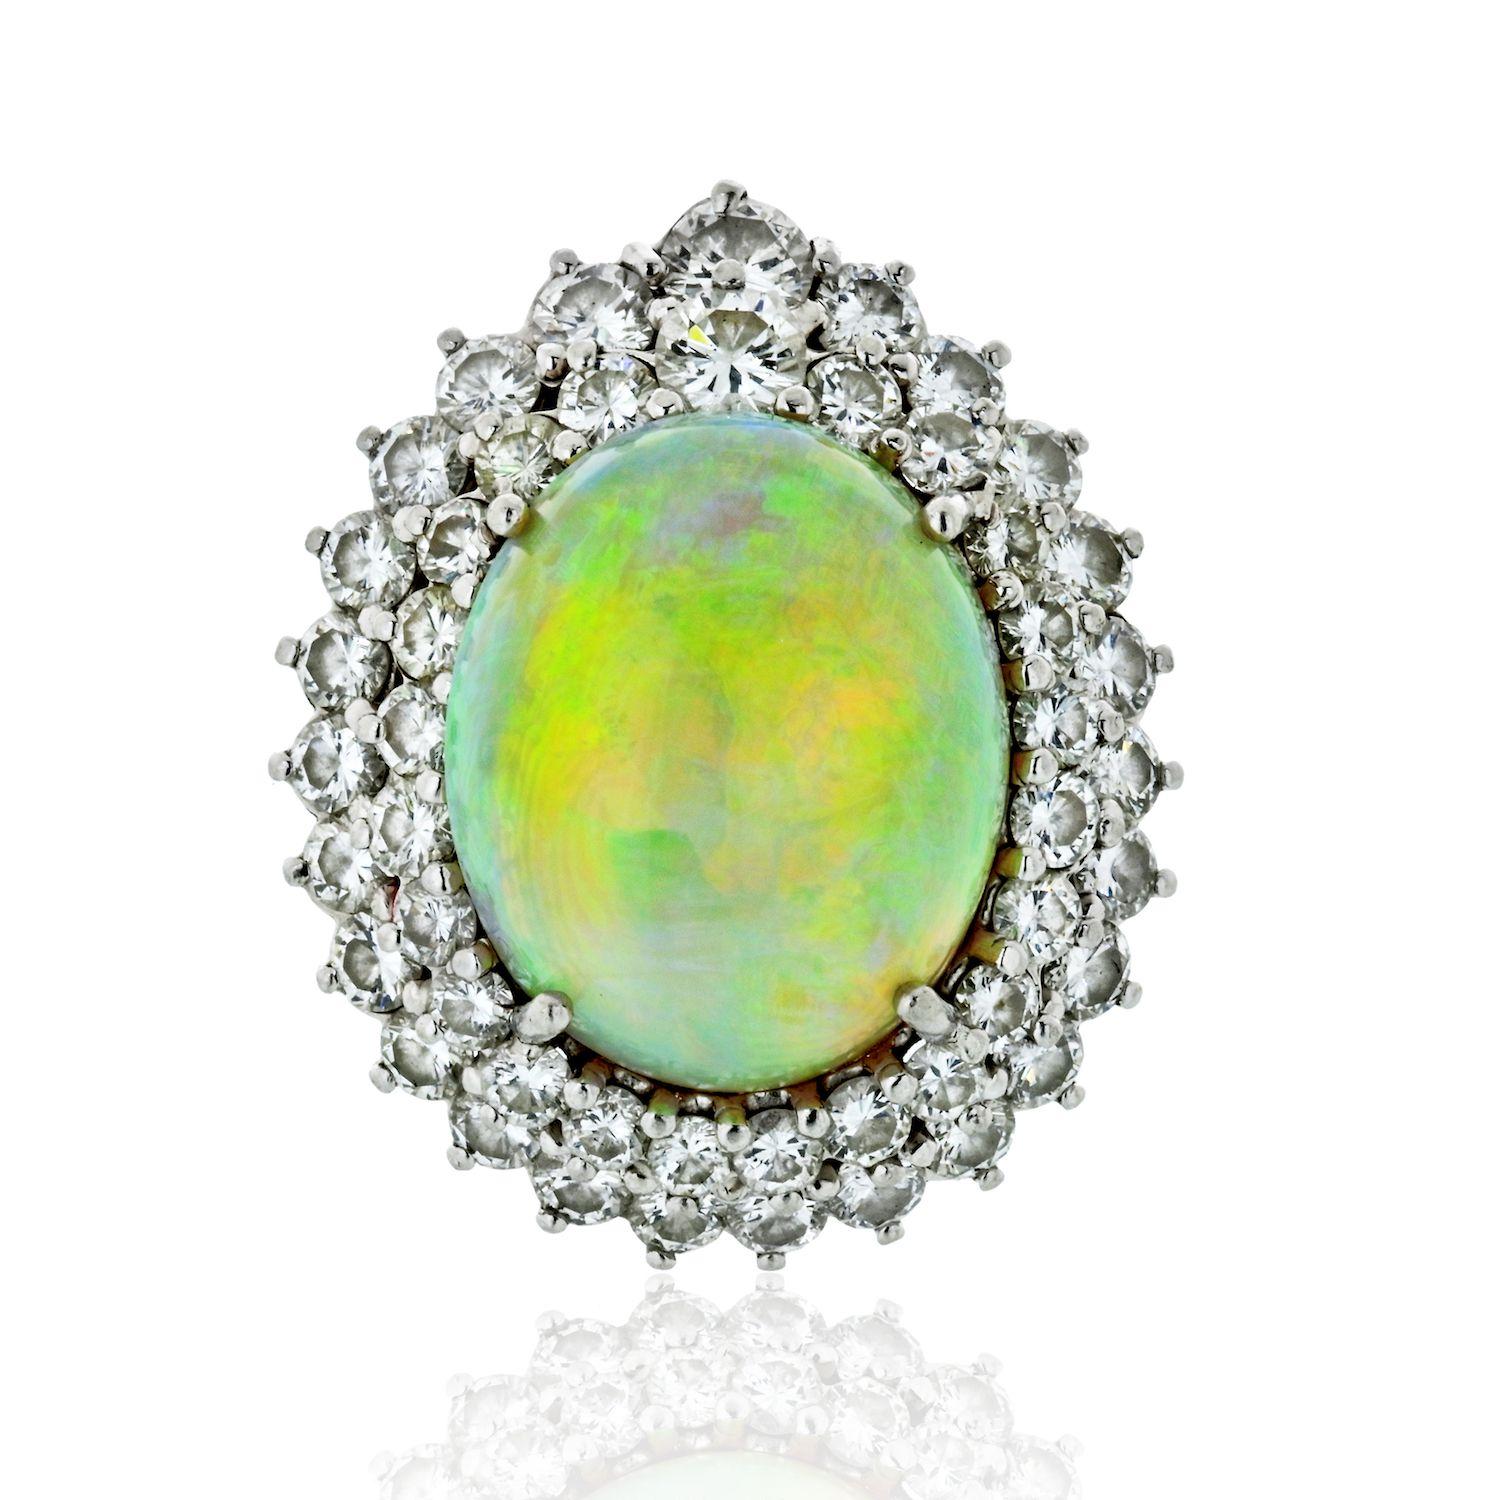 Platinum Opal & Diamond Ring, large opal of rainbow fire, low dome cabochon, 48 round-cut diamonds as double halo, diamonds of H-I color VS-SI clarity, app 4.50 ct tw.
Circa 1970.
Ring size 7.5